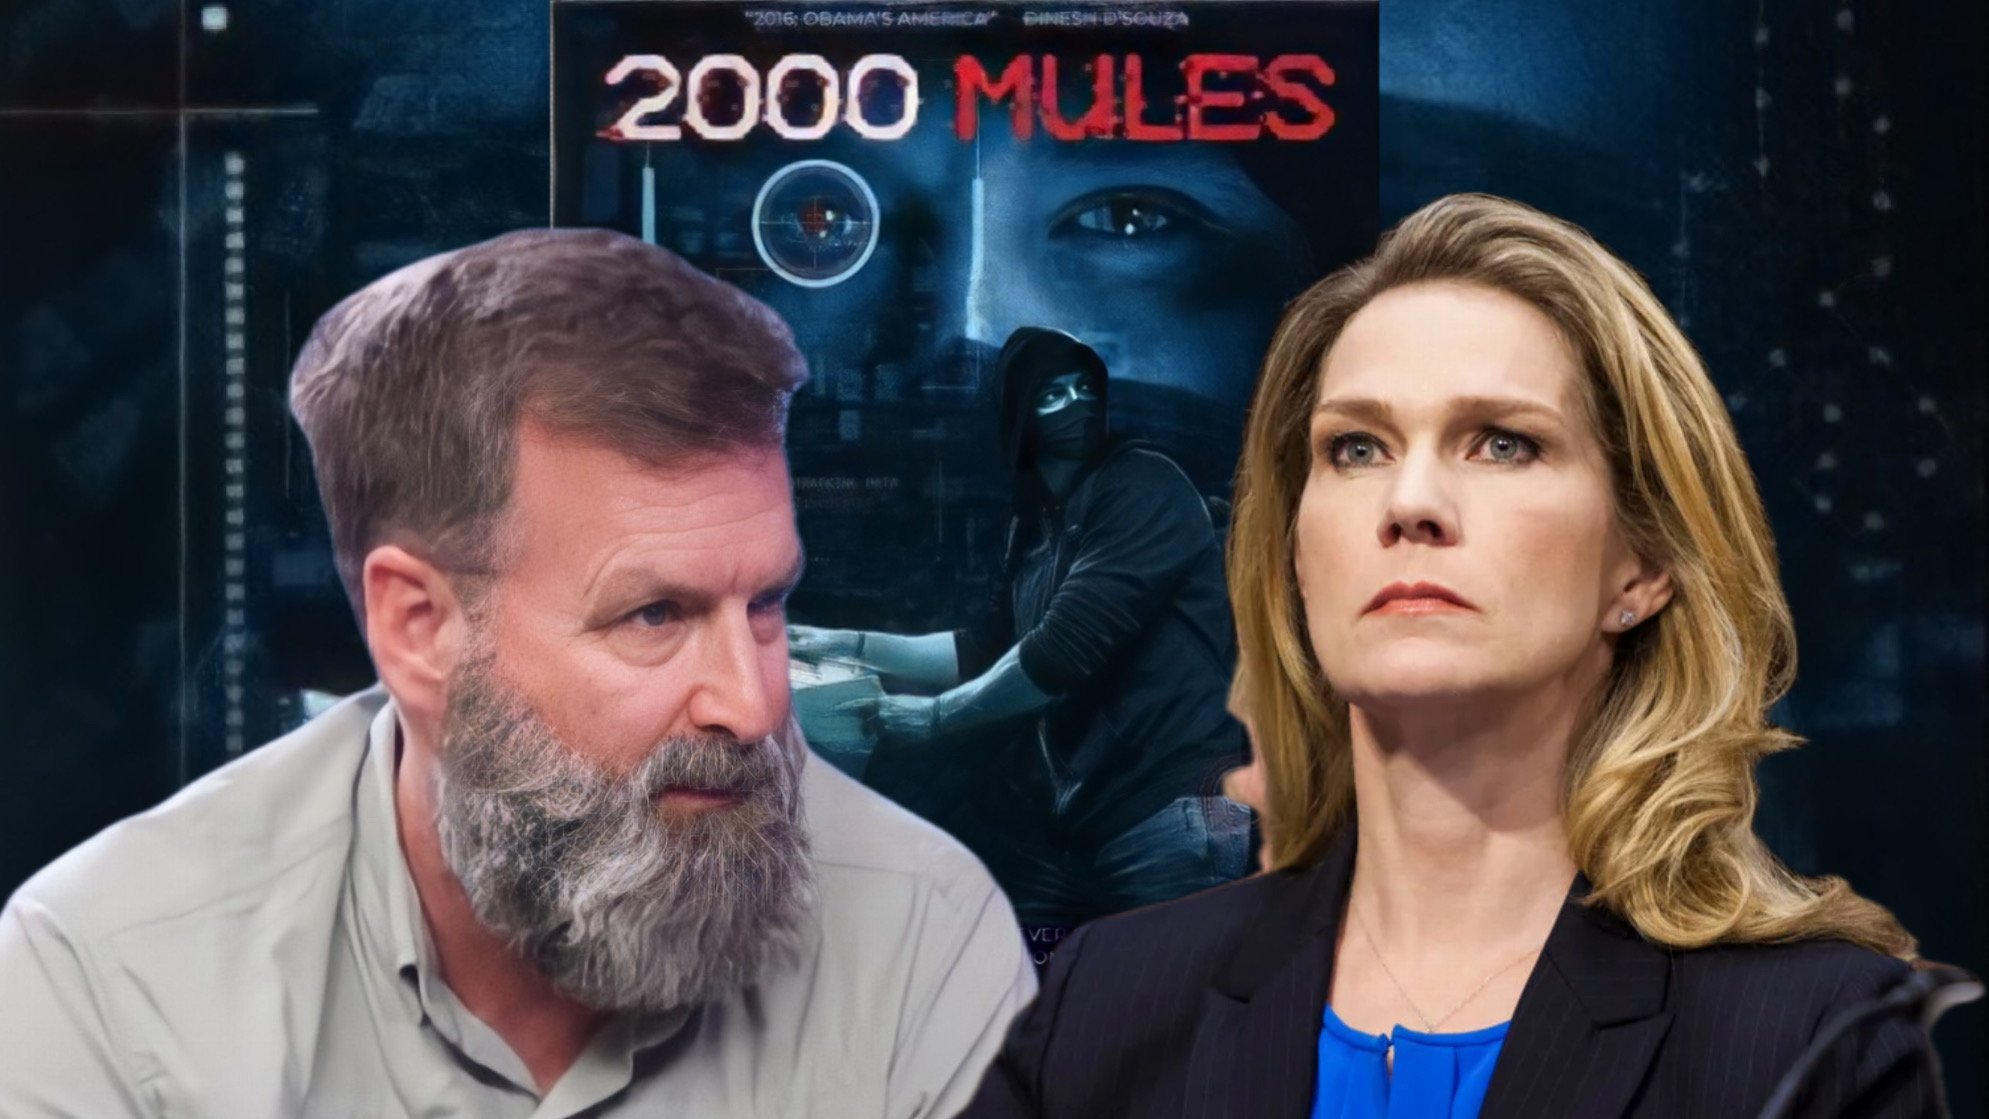  Trump-Endorsed Gubernatorial Candidate Kari Lake Triggers Radio Host That Won’t Talk About ‘2000 Mules’ Documentary: “They [KTAR] Will Not Allow You To Tell The Truth About The Election”